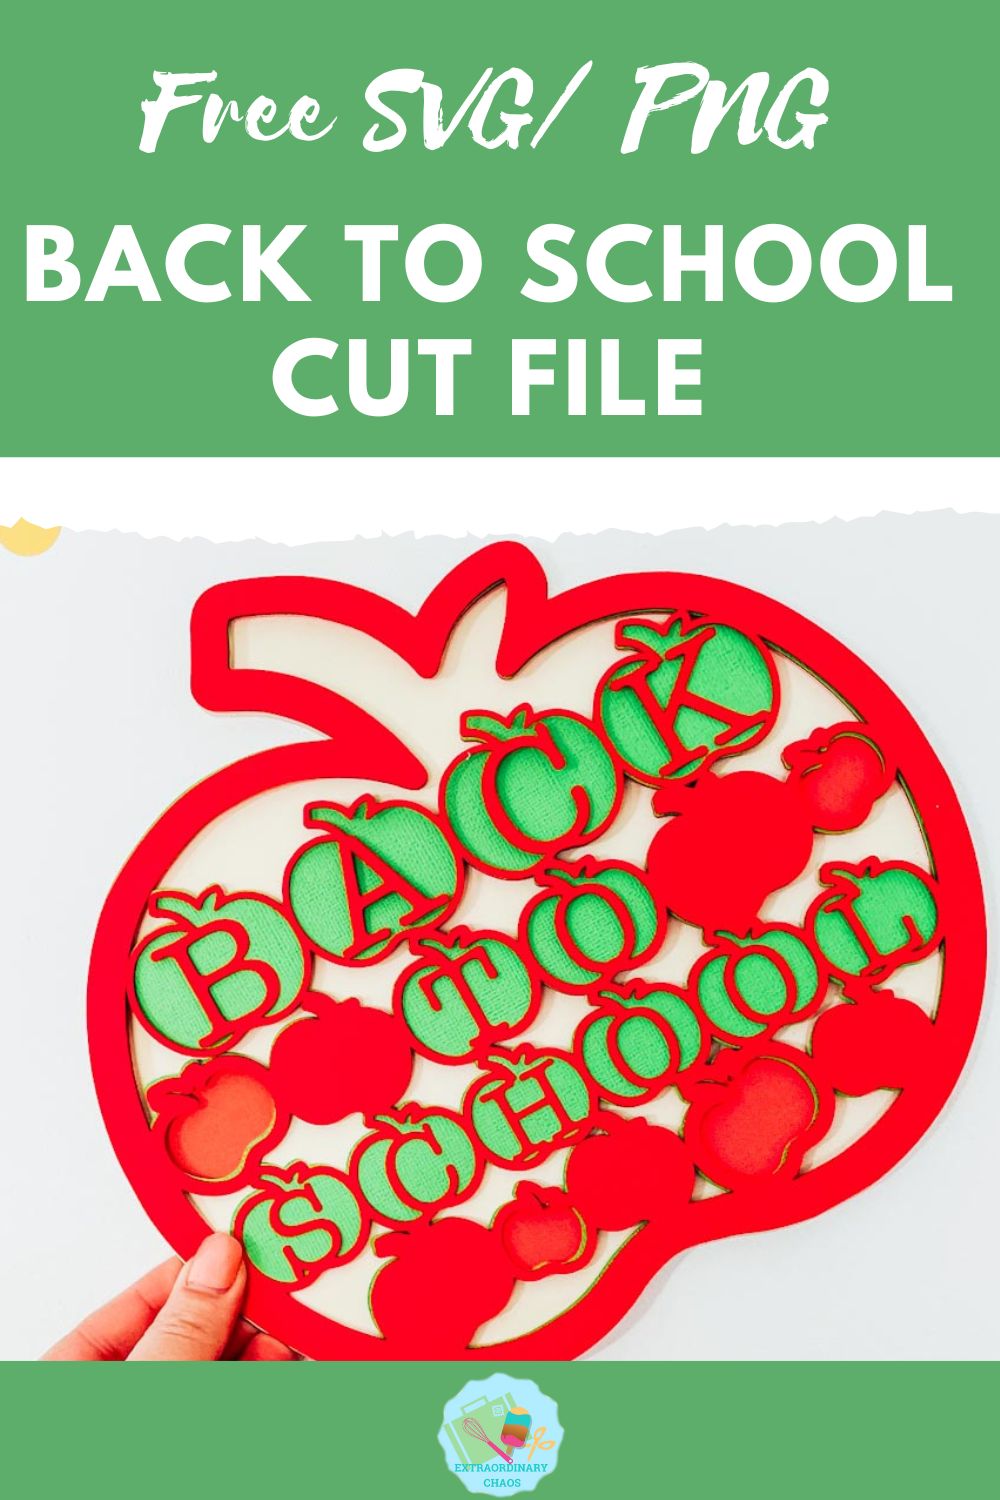 Free Back To School Cut file SVG, PNG for Cricut, Glowforge